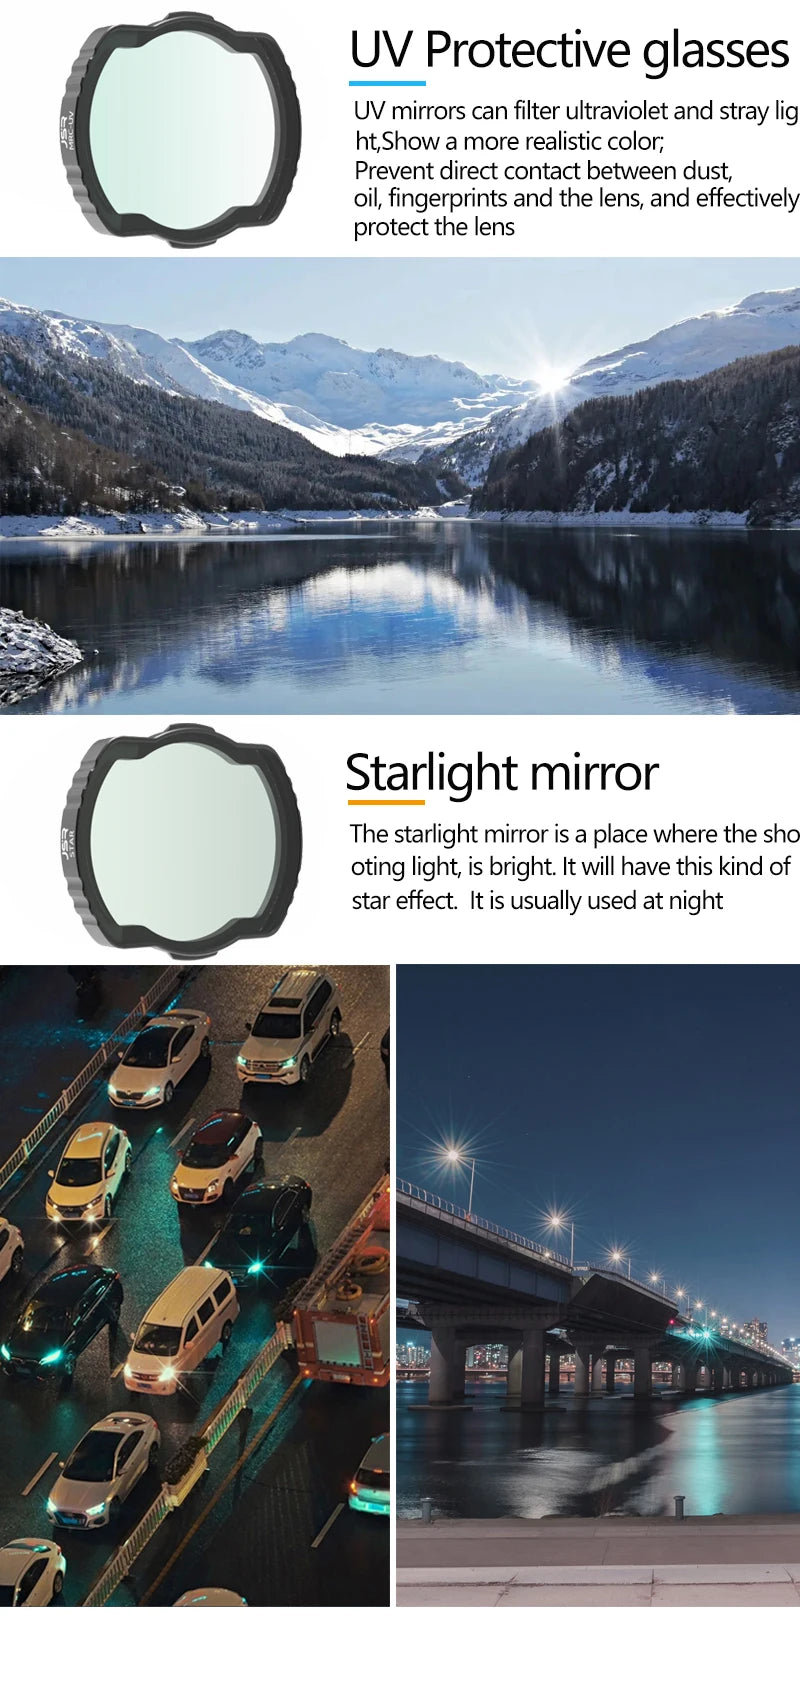 New Filter, starlight mirror is a place where the sho oting light; is bright 